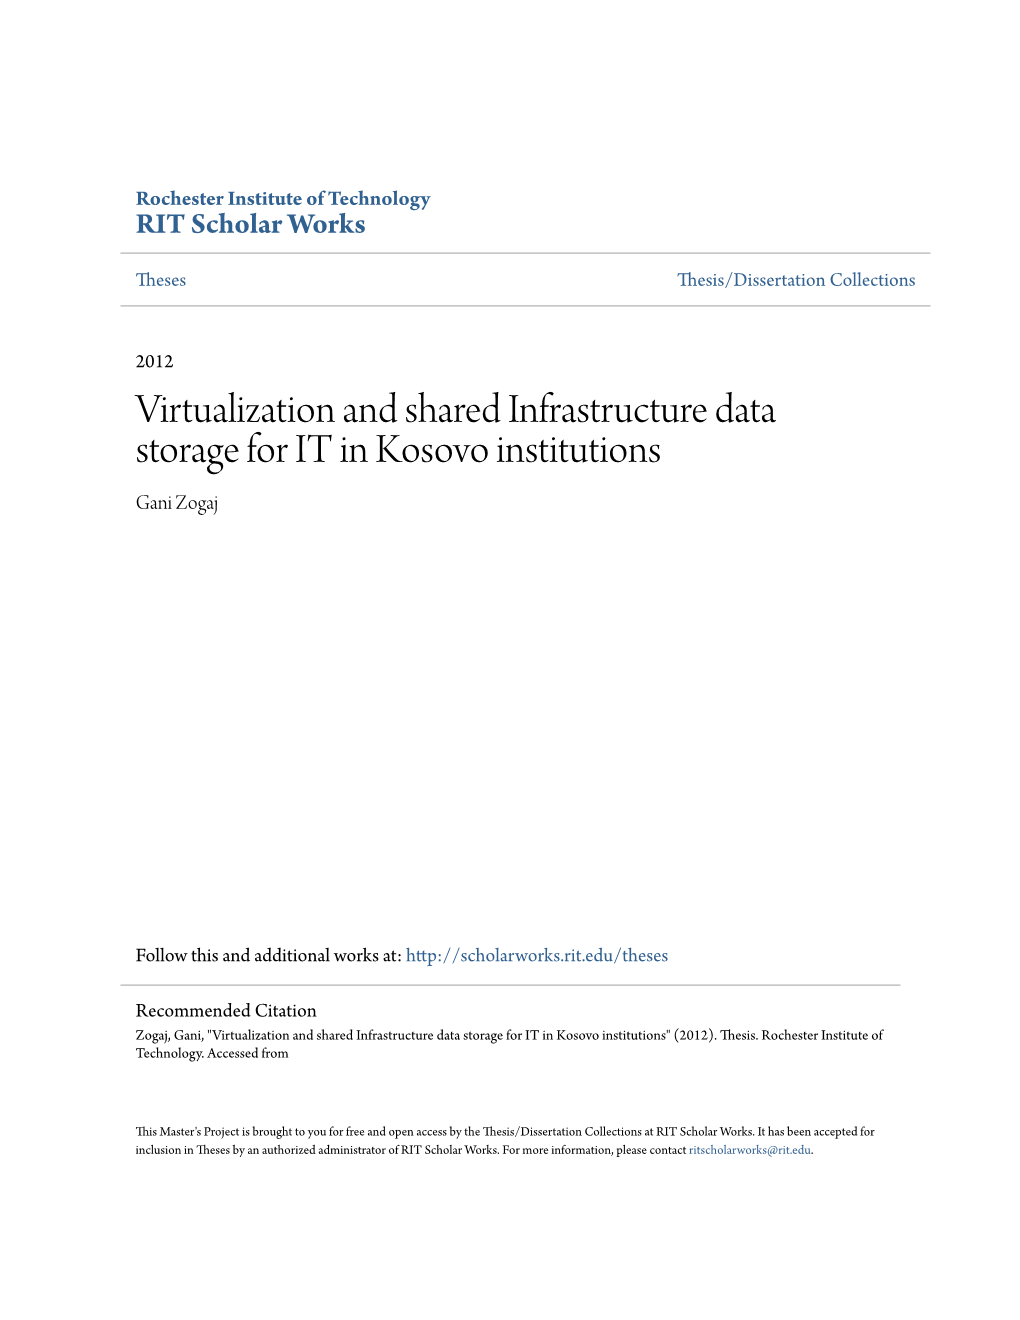 Virtualization and Shared Infrastructure Data Storage for IT in Kosovo Institutions Gani Zogaj